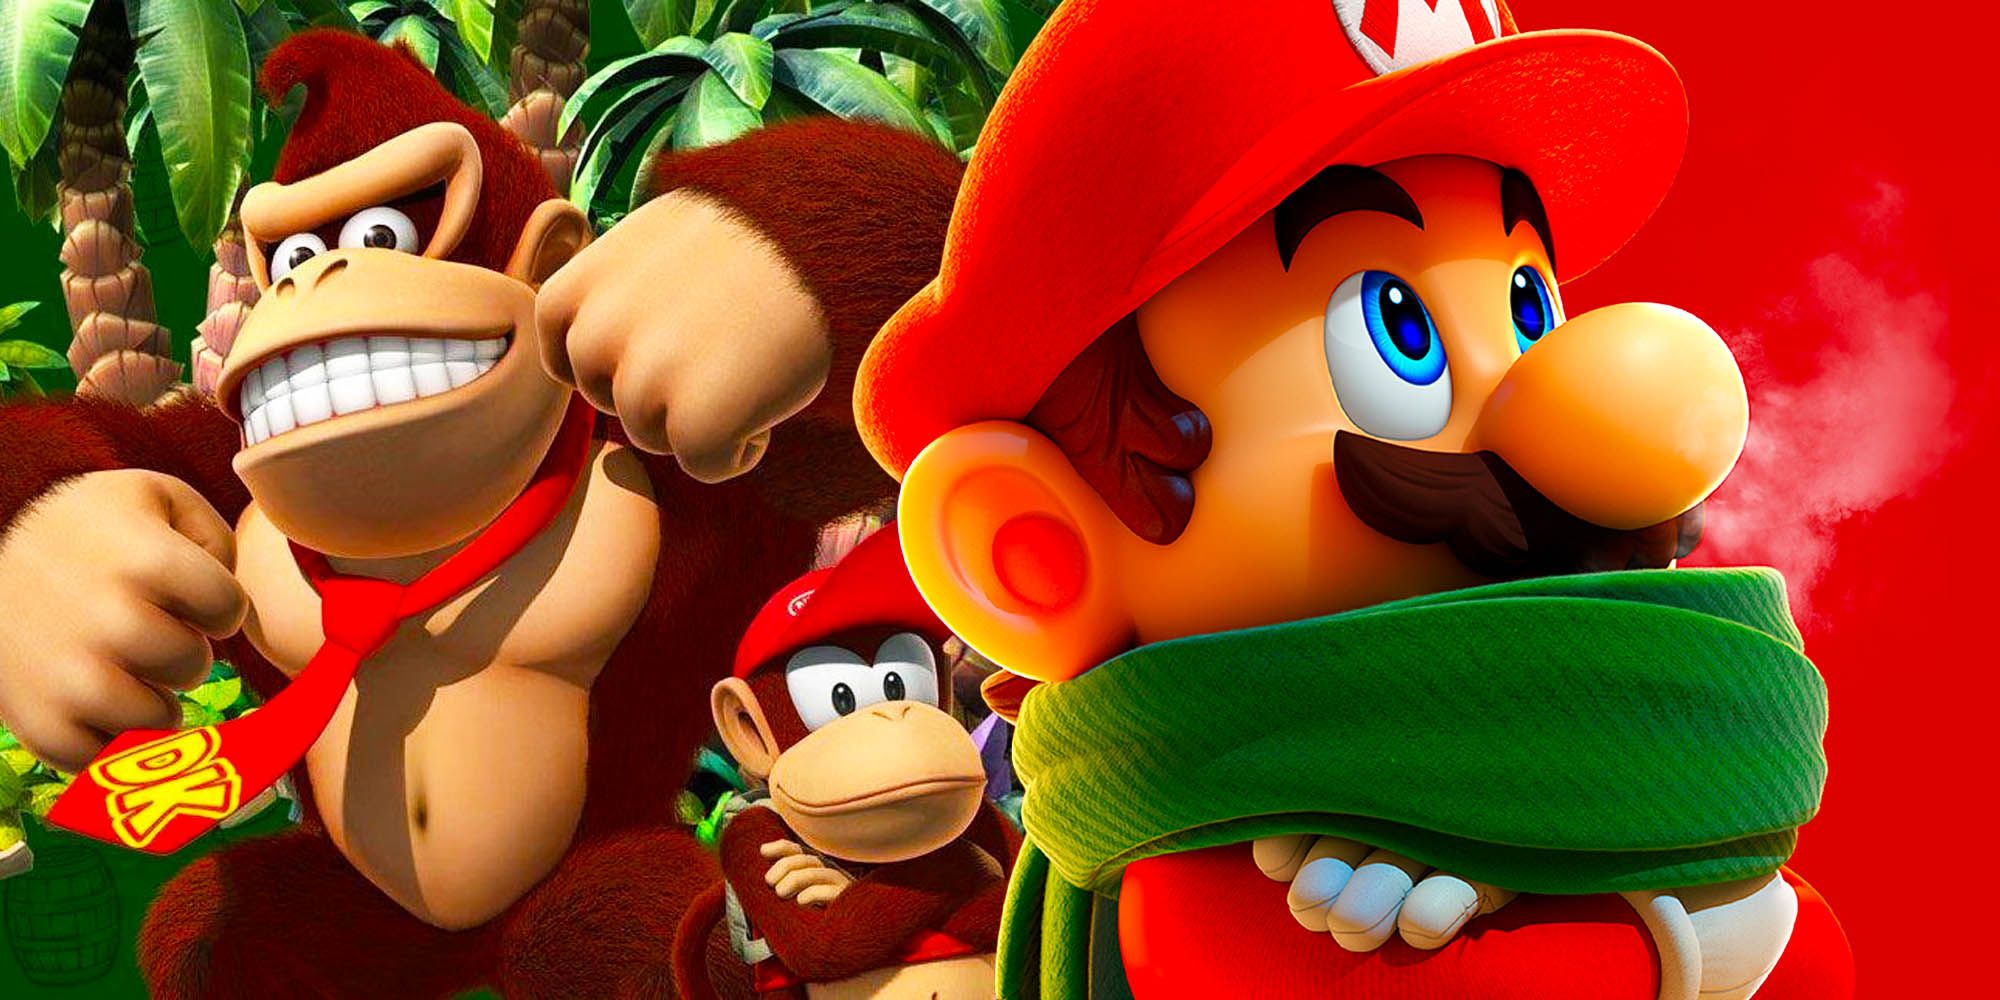 Donkey Kong and kid in background with Mario imposed on the right looking the other direction